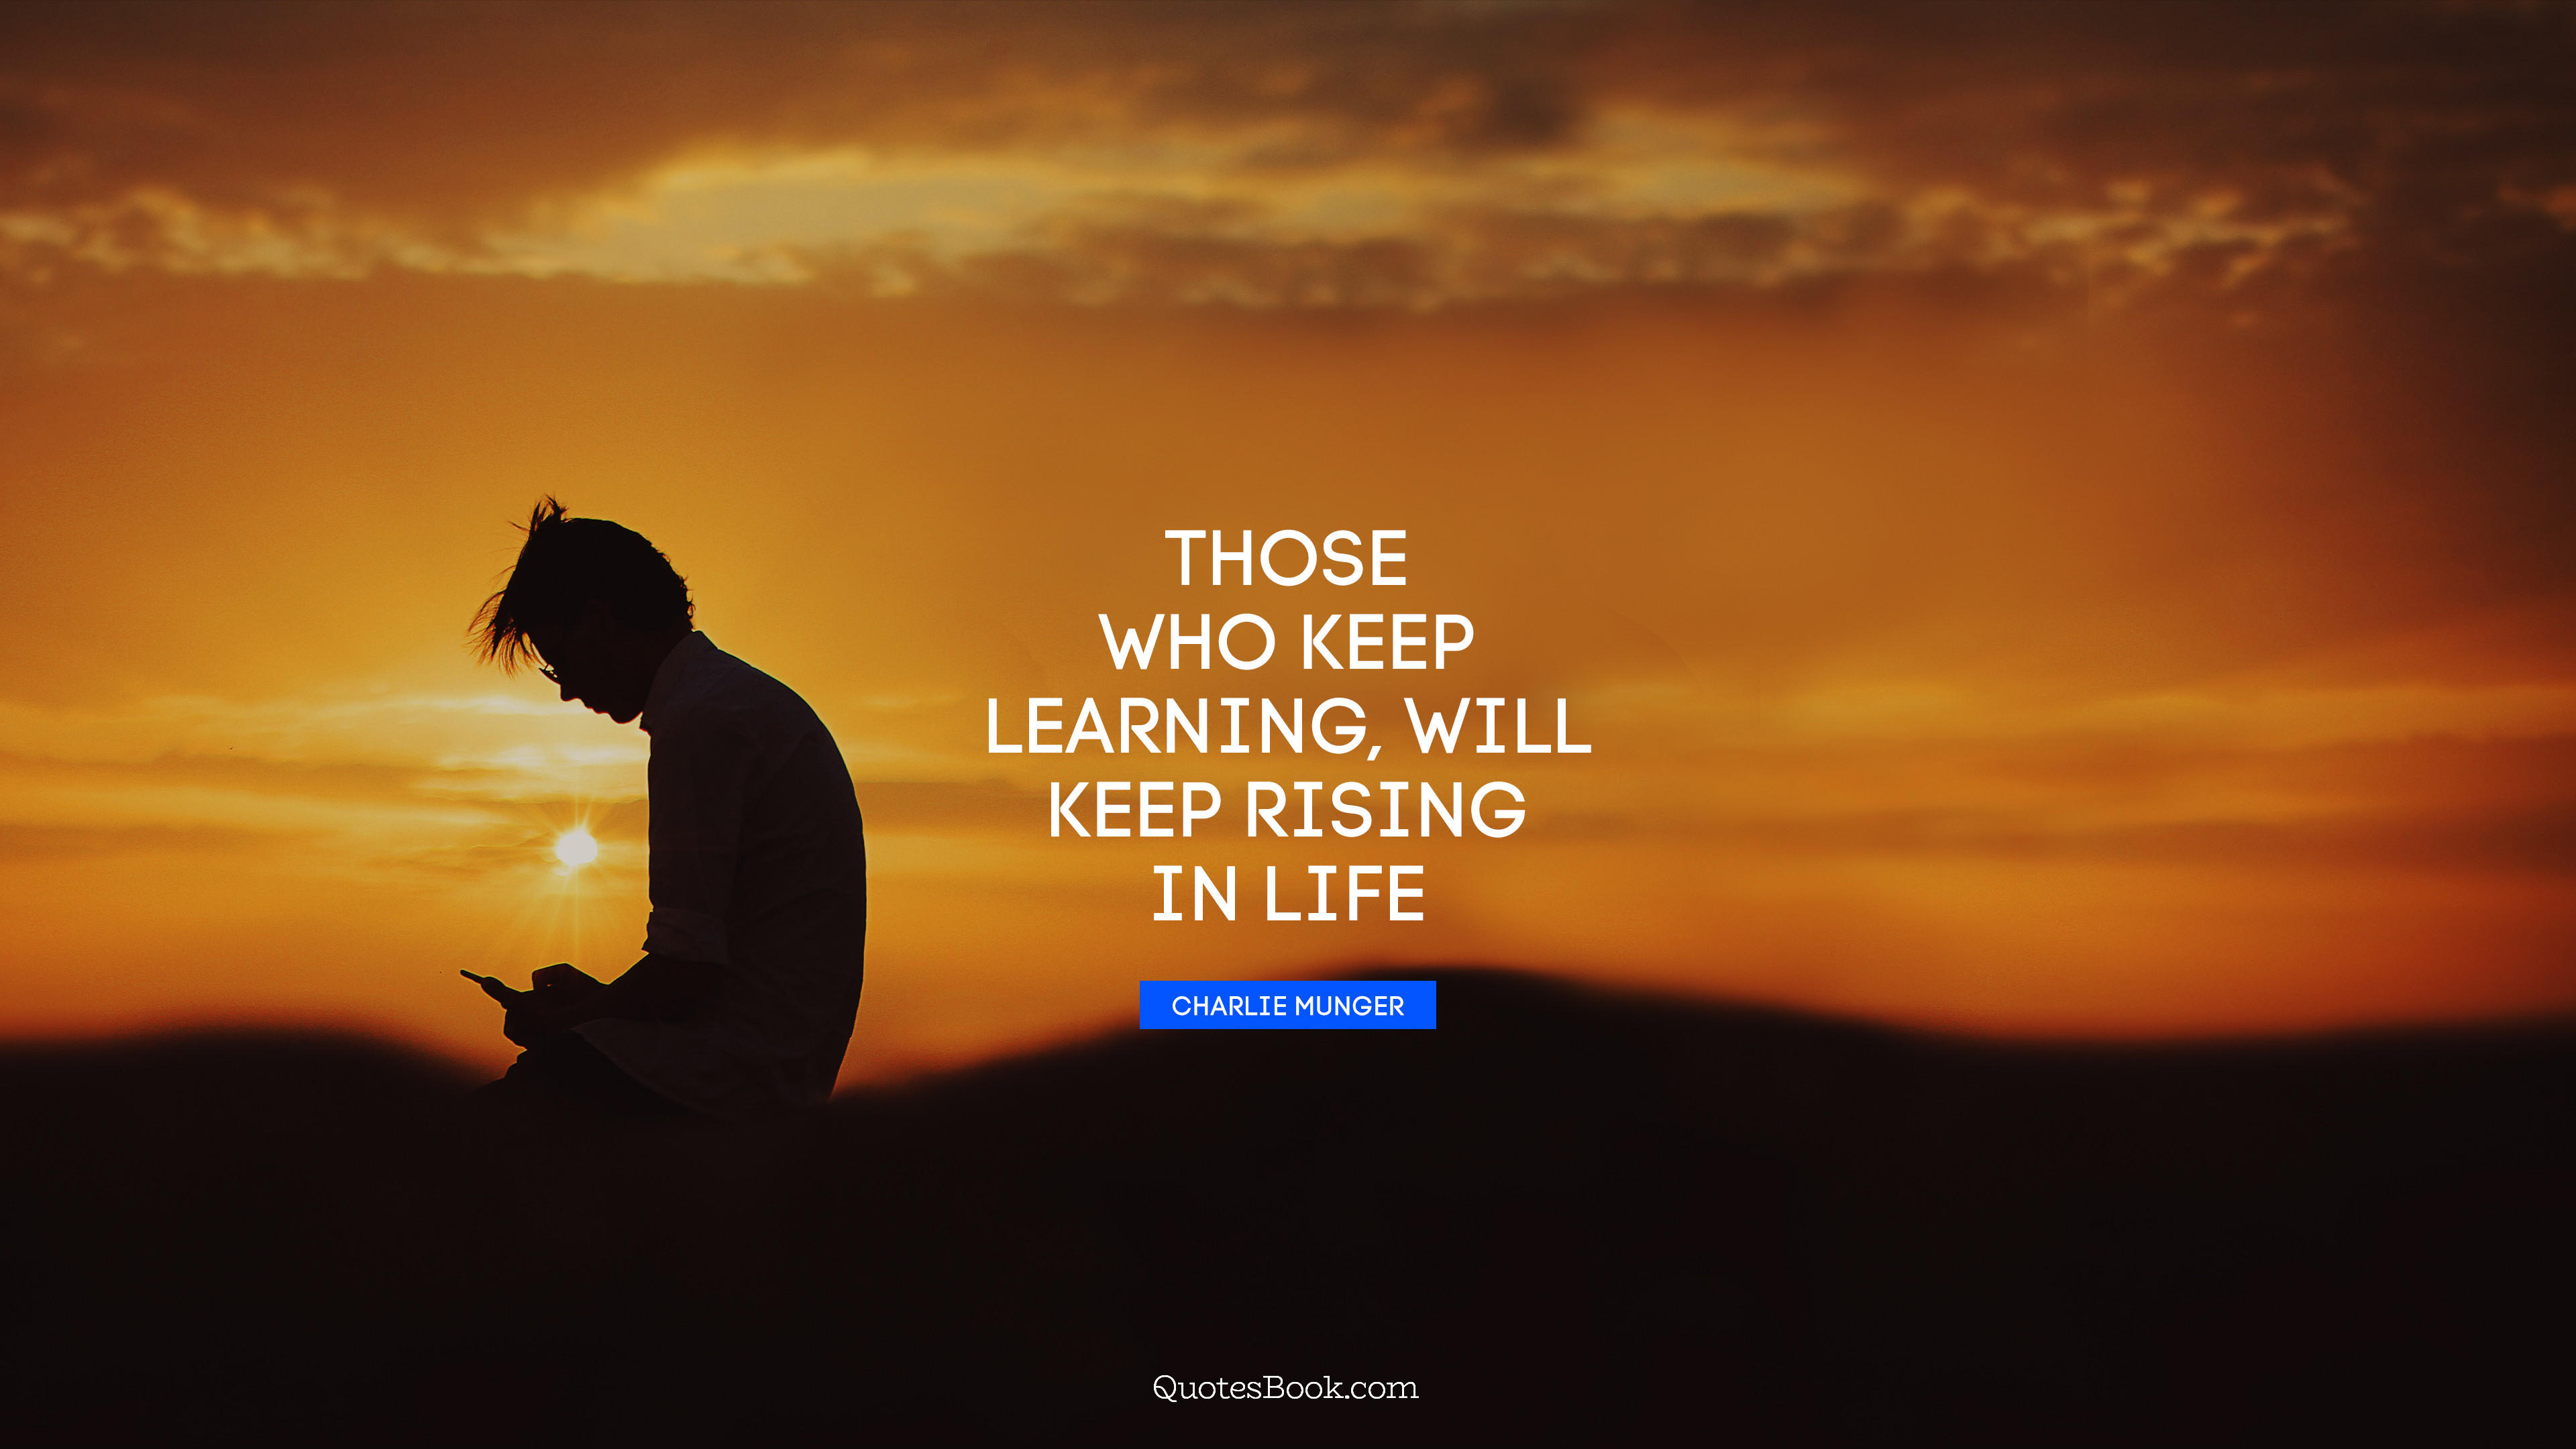 Those who keep learning, will keep rising in life. - Quote 